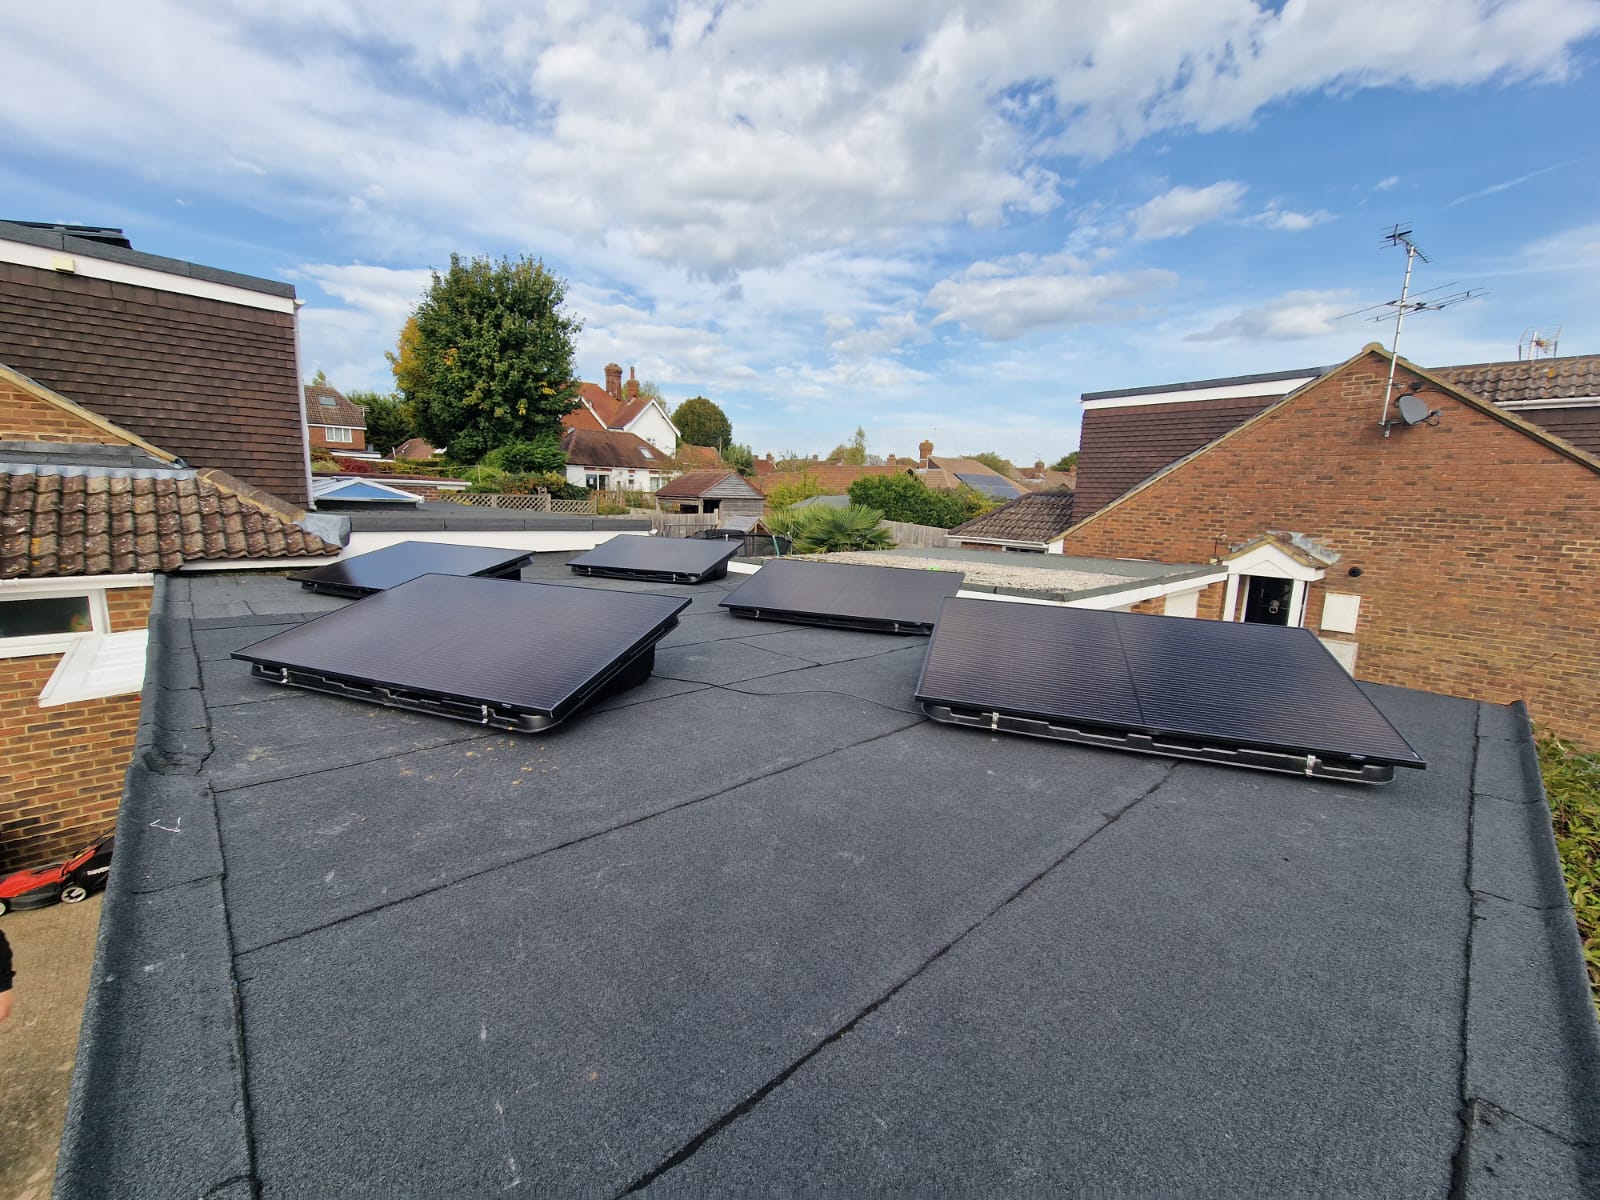 Solar panels mounted on a garage flat roof at a customer’s house